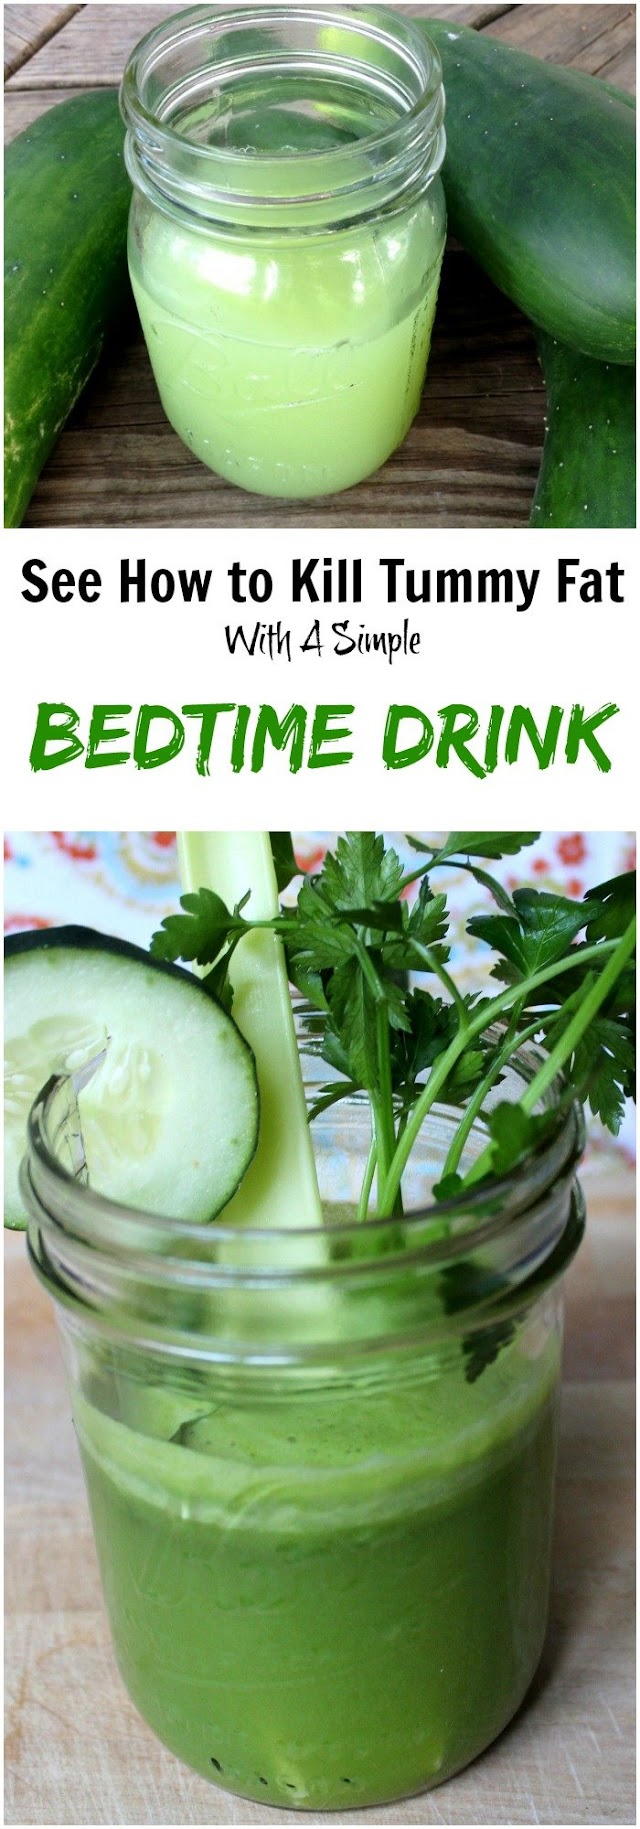 This 1 Simple Bedtime Drink Kills [Tummy Fat] While You Sleep